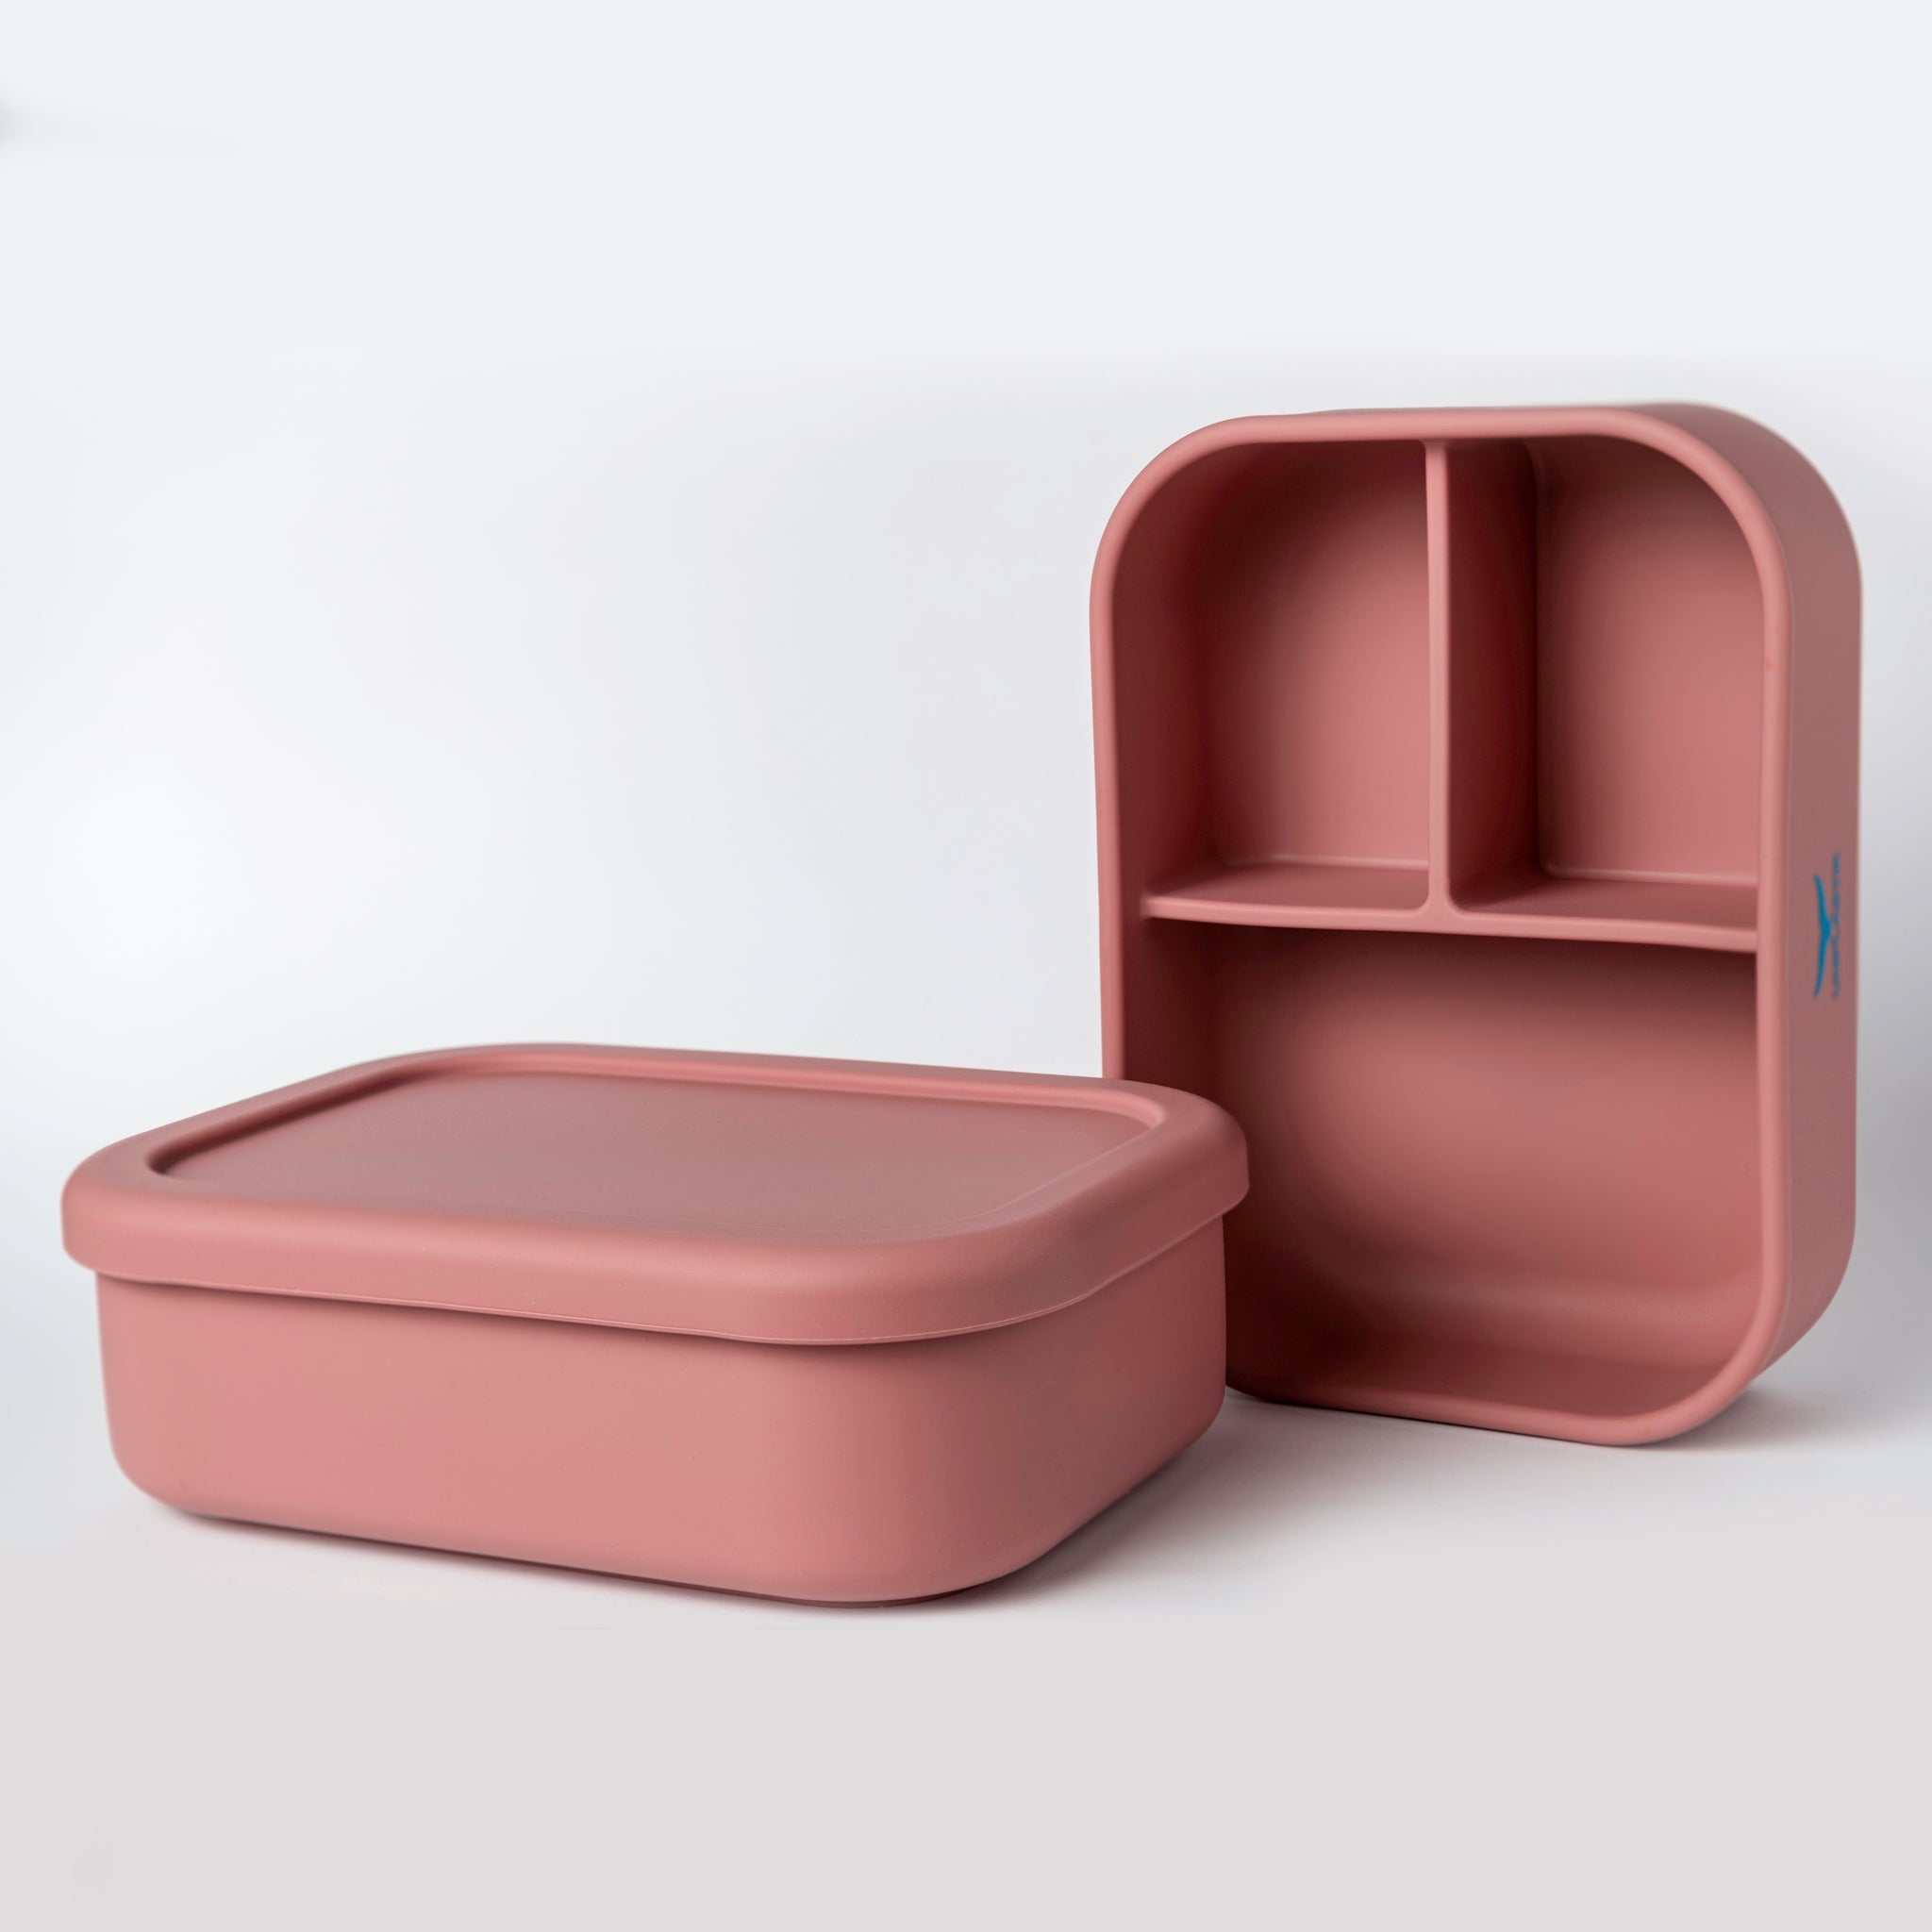 Salad Container with 3 Compartments - Pink 